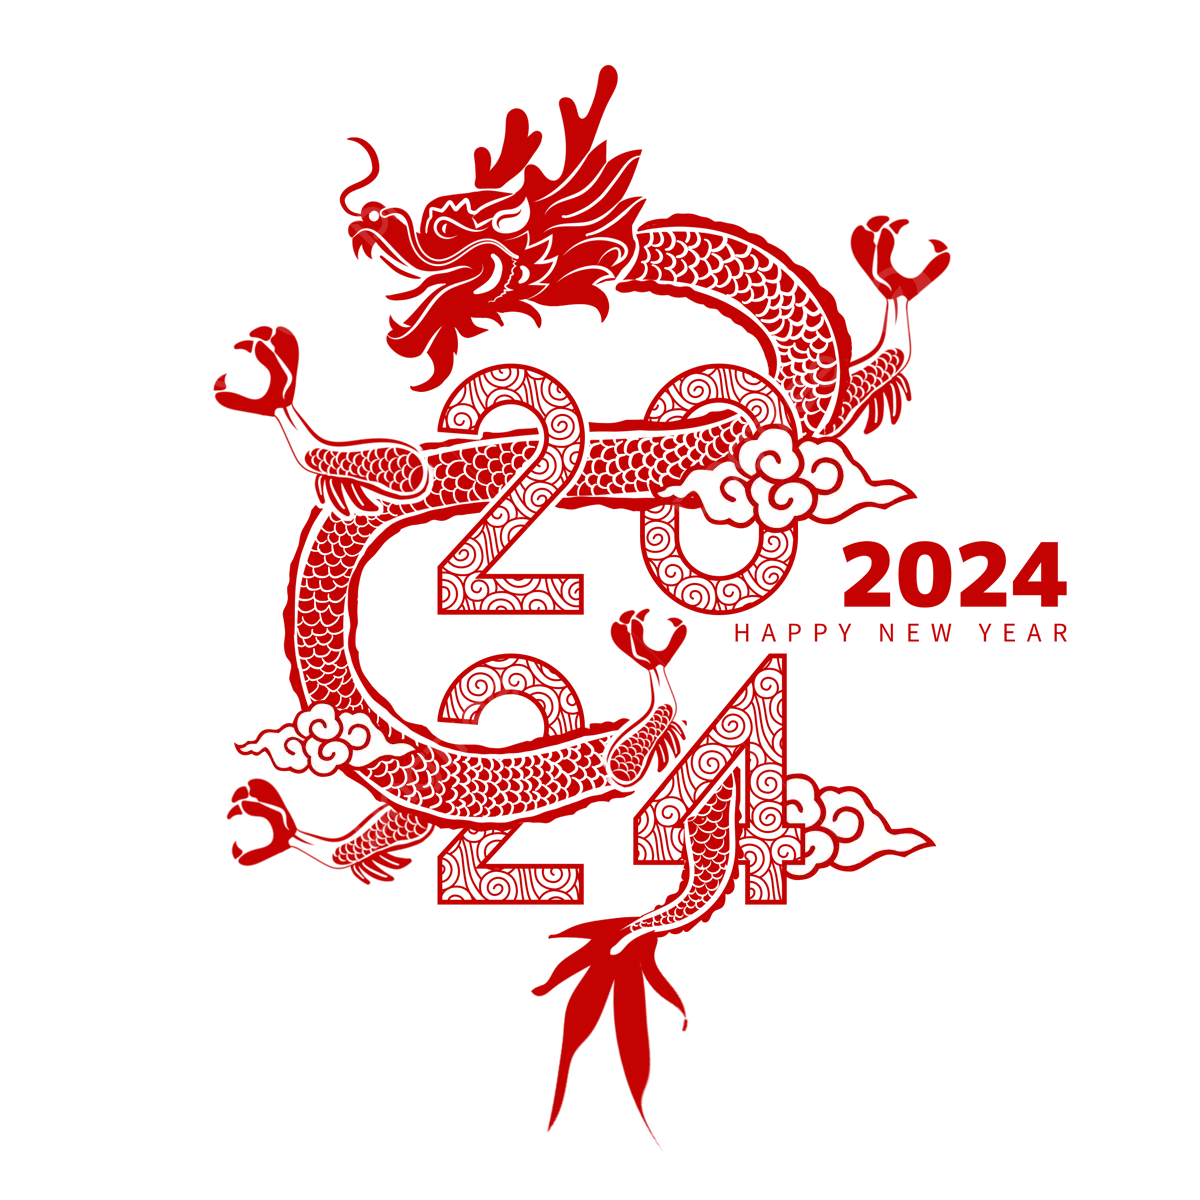 Red dragon entwined in "2024".